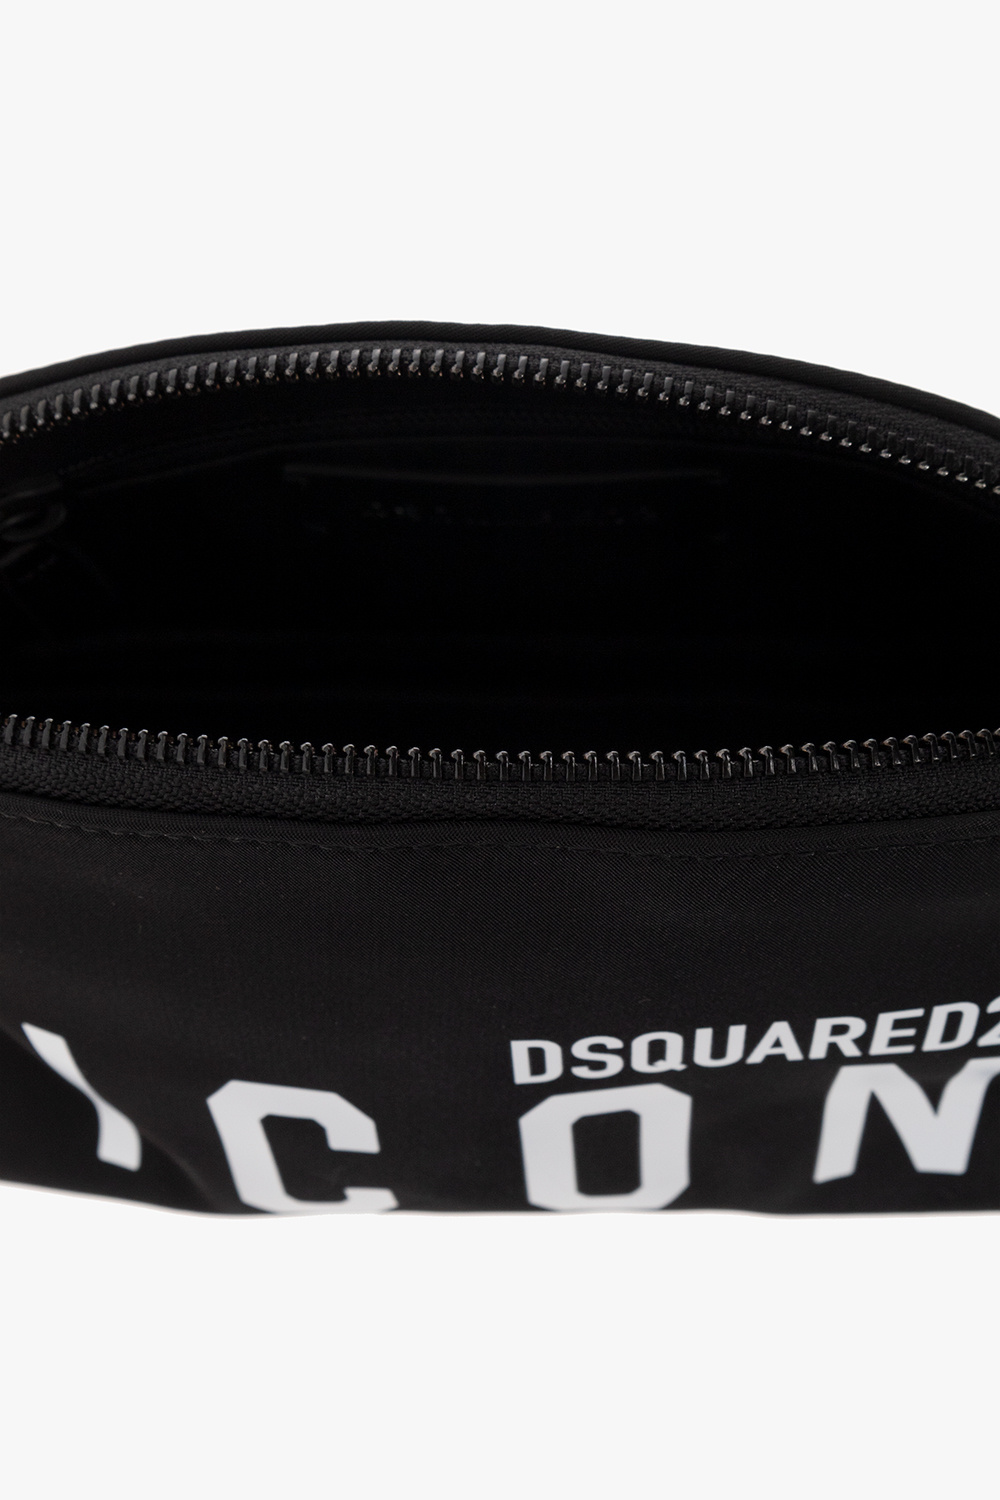 Dsquared2 Collection Waist Bag